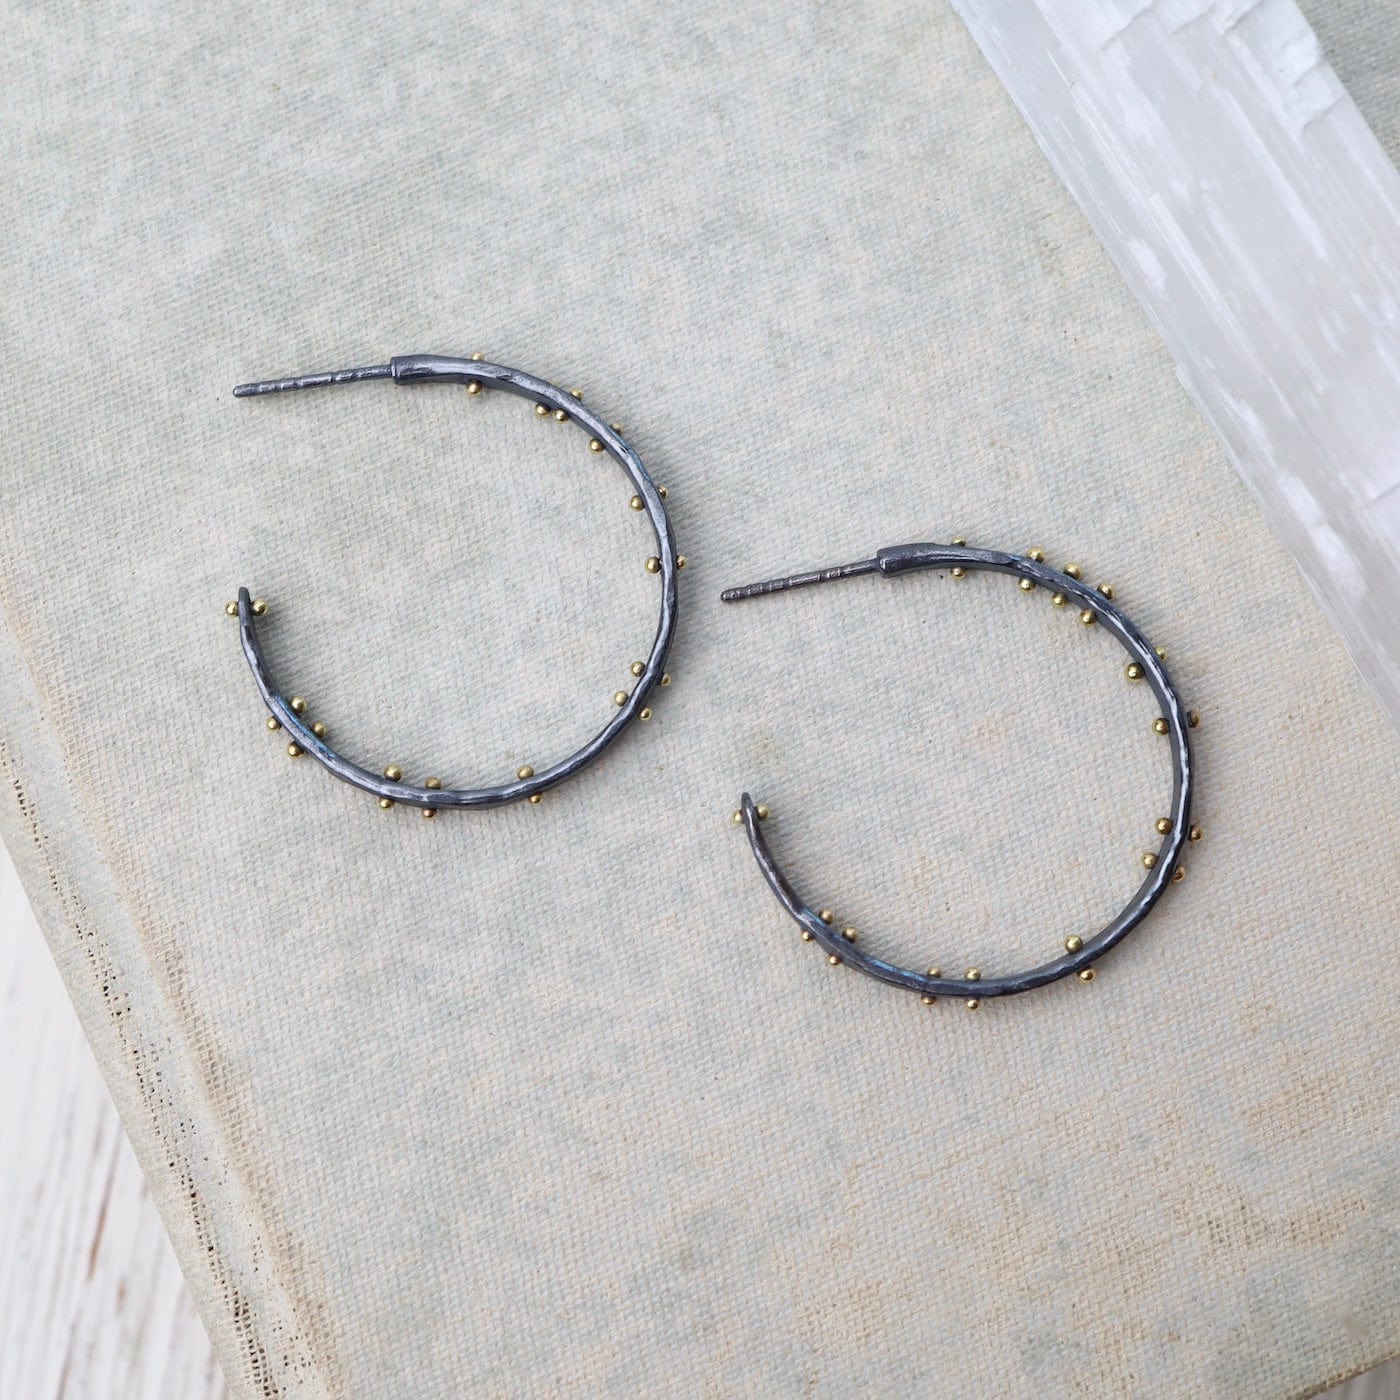 EAR-18K Medium Scattered Dot Hoops - Oxidized Silver with 18k Gold Dots